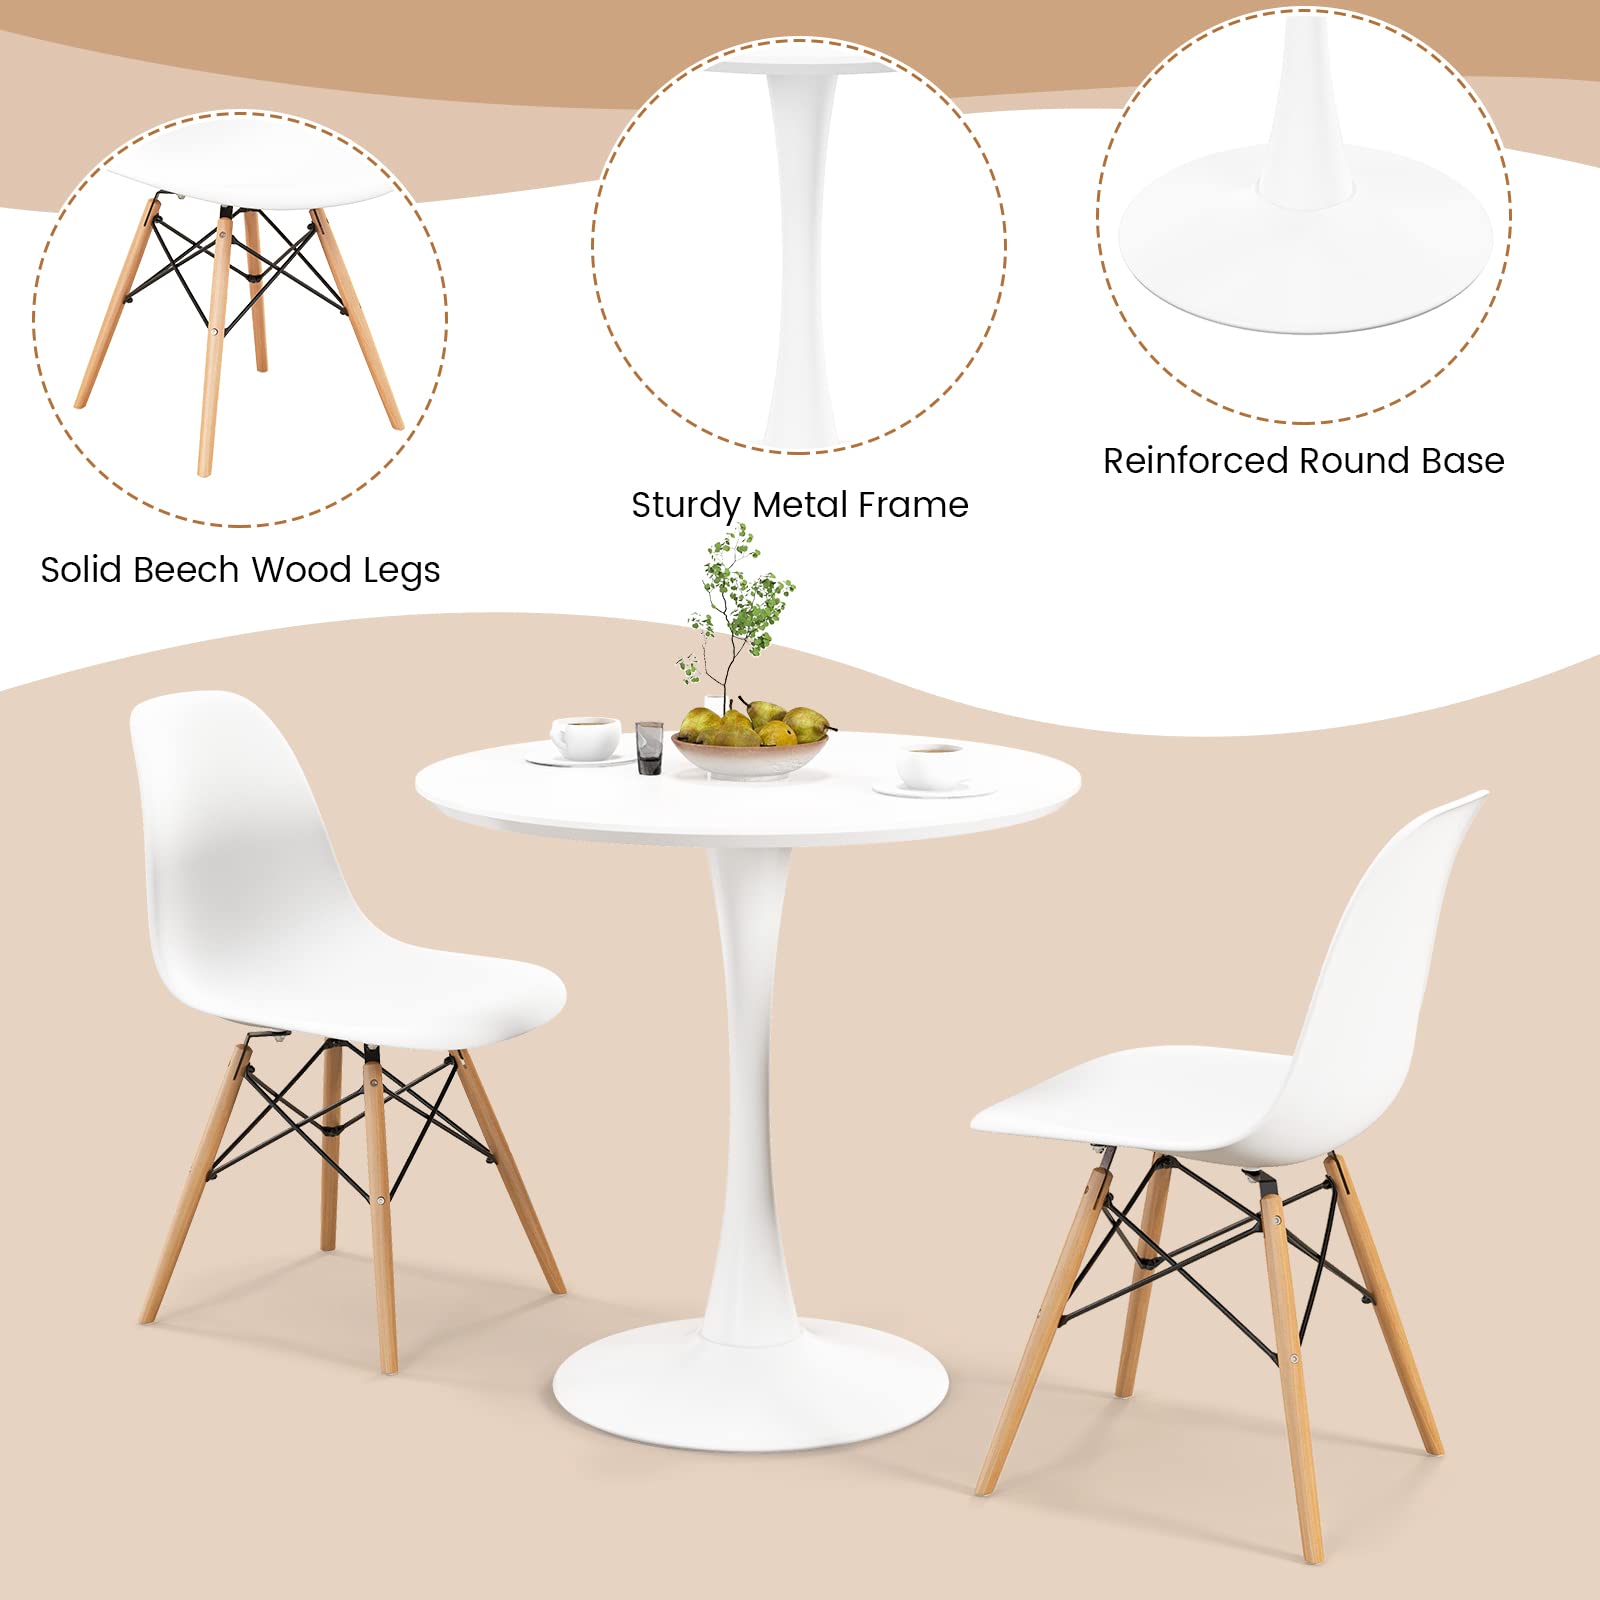 Giantex 3-Piece Dining Room Table Set for 2, Compact Kitchen Dining Table Set with 32" Round Table and DSW Chairs